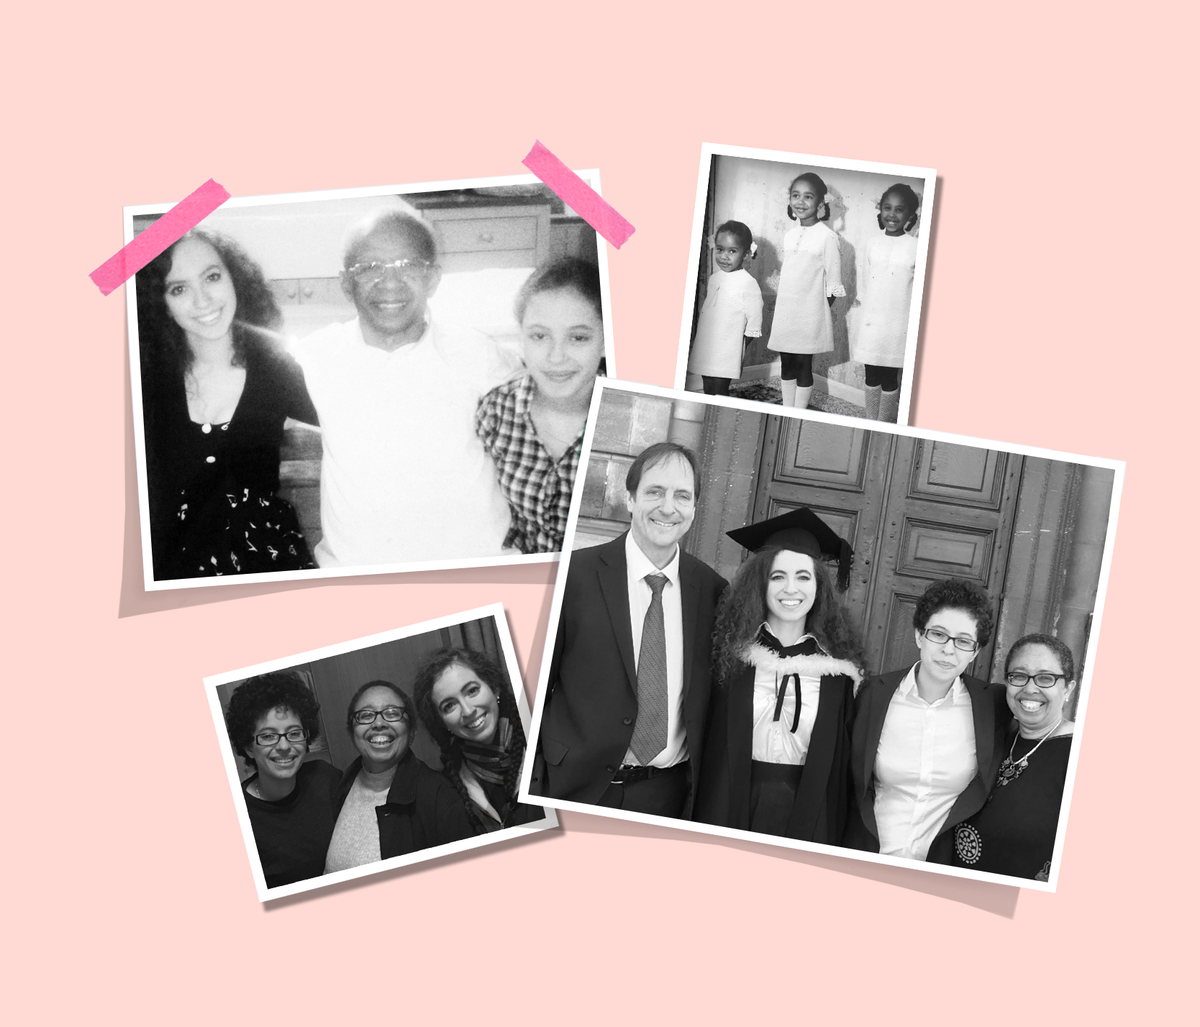 a collage of family photos in black and white on a light pink background